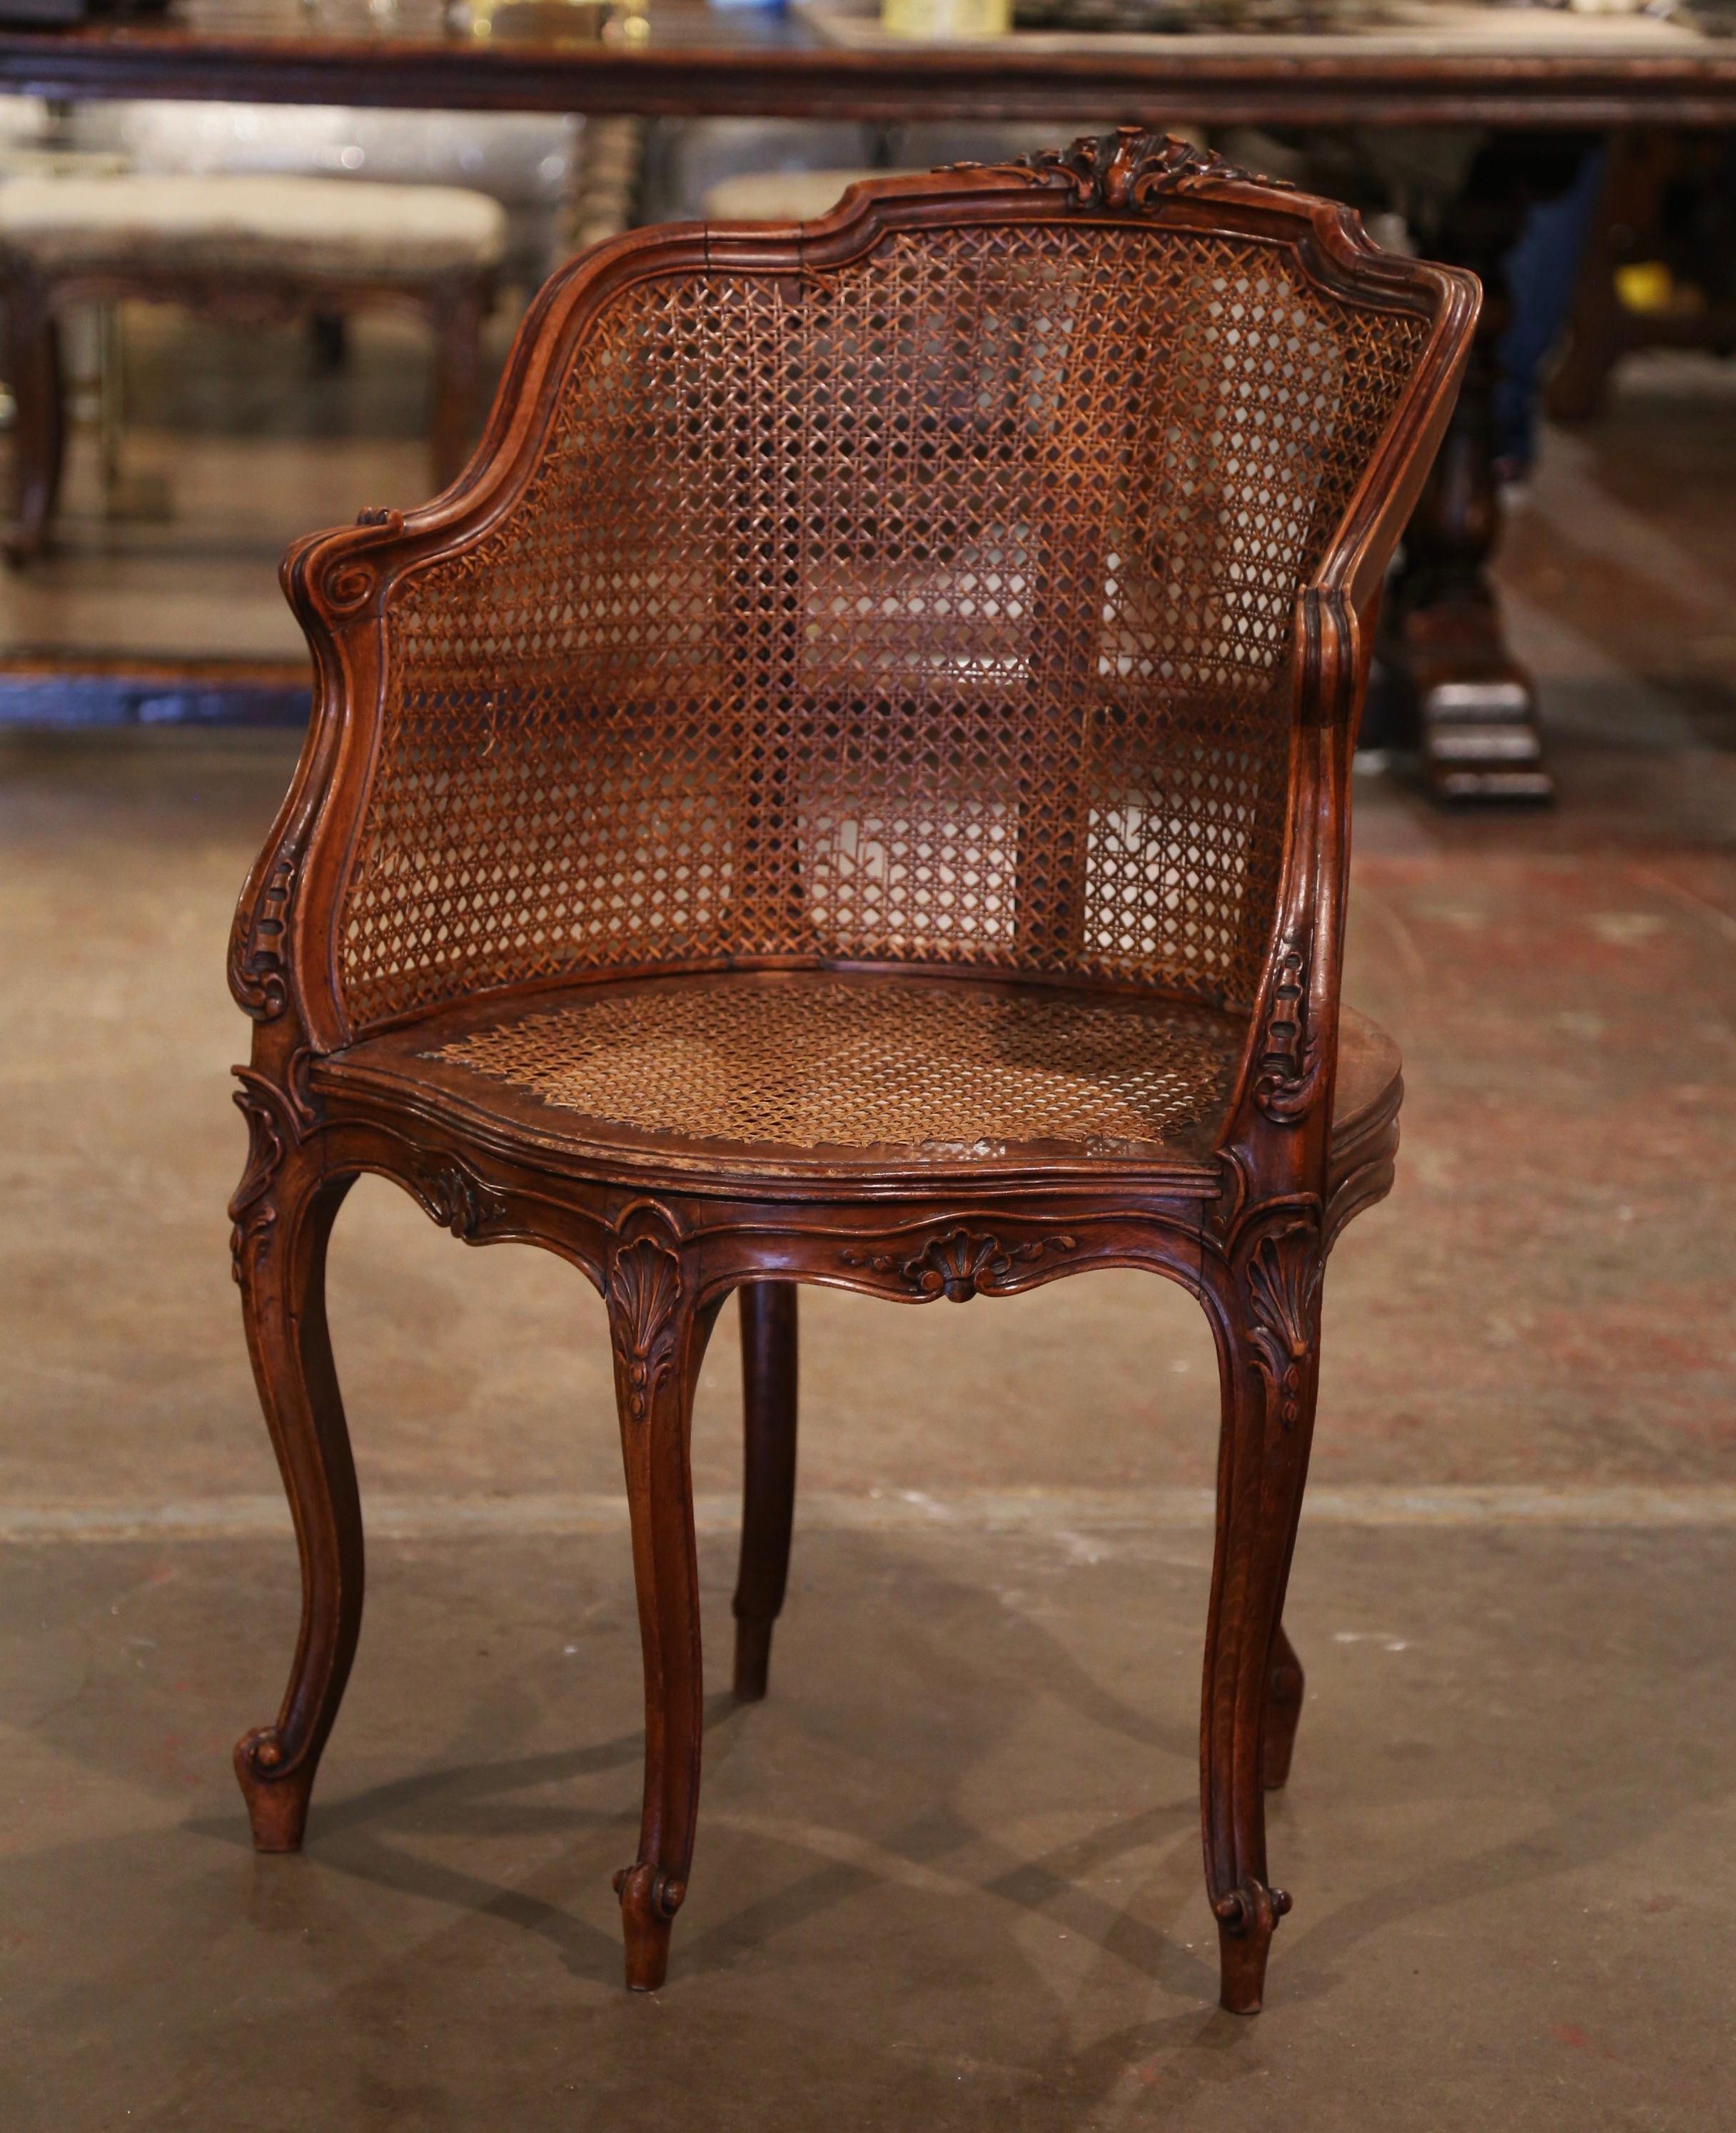 Decorate a study or office with this elegant antique desk armchair. Crafted in Provence, France, circa 1880, the corner chair has an arched cane back decorated with a shell motif at the pediment. The traditional desk chair stands on five cabriole